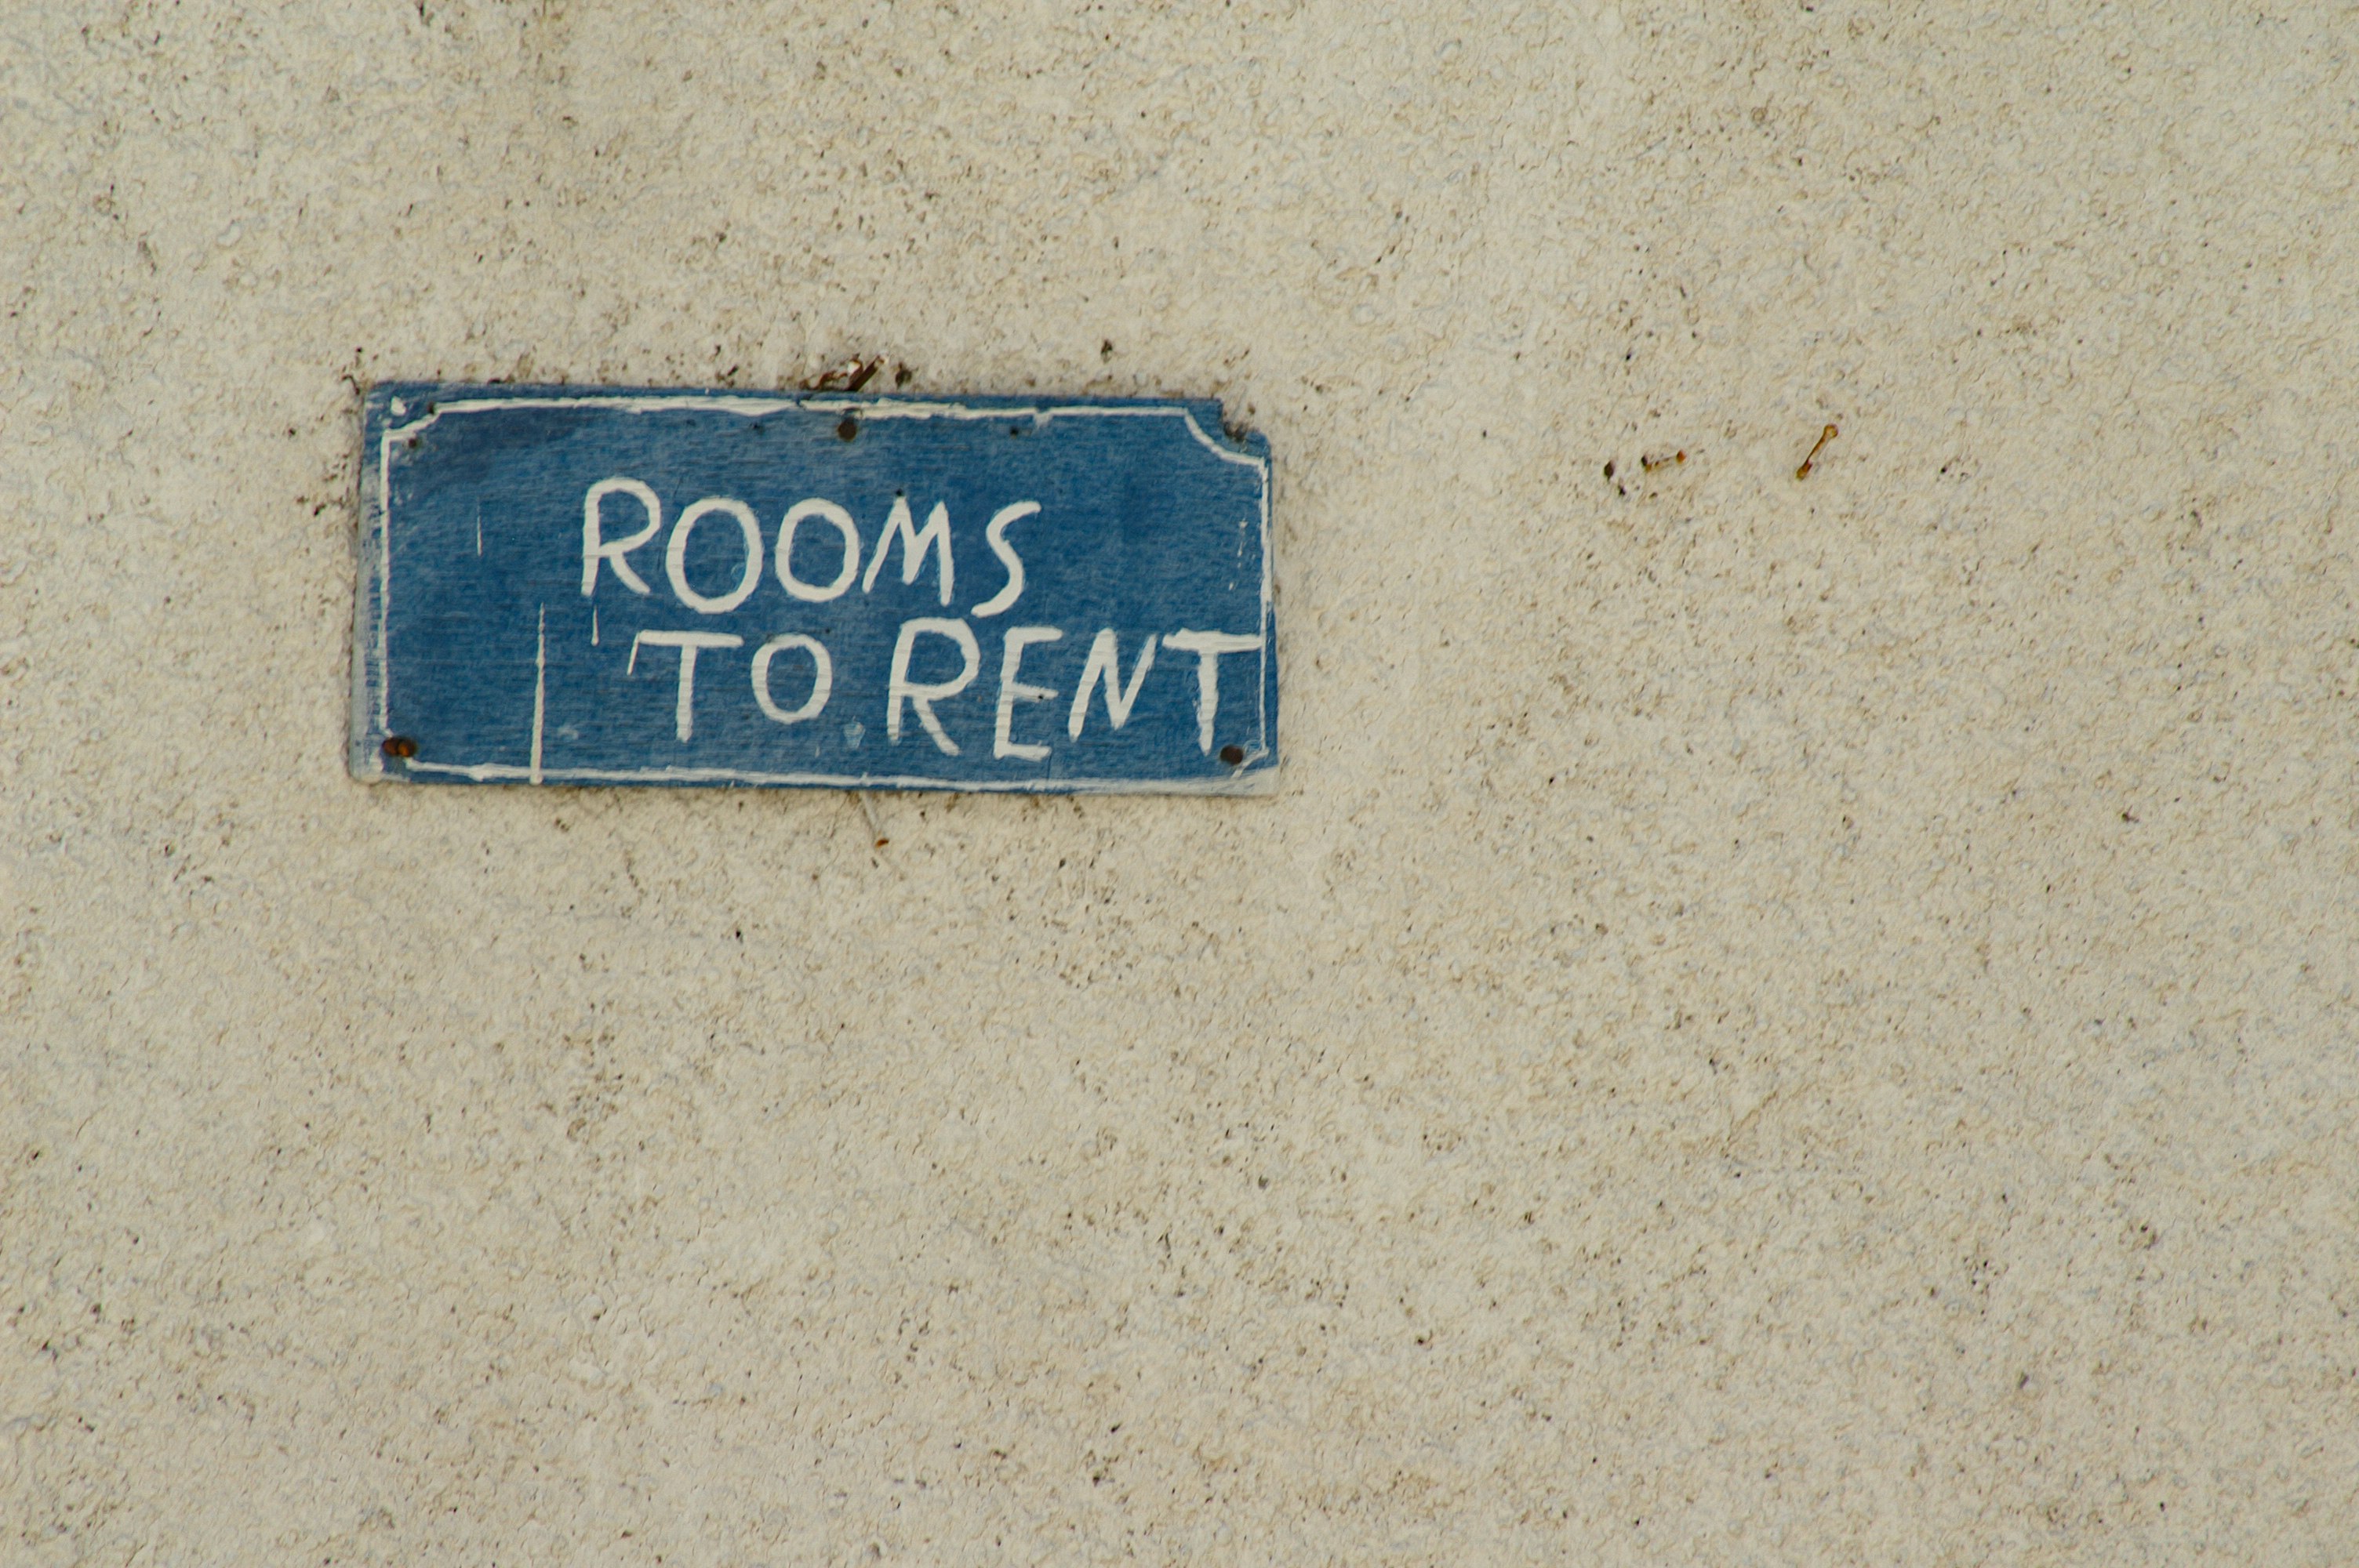 A sign that reads 'ROOMS TO RENT' hangs on a wall.